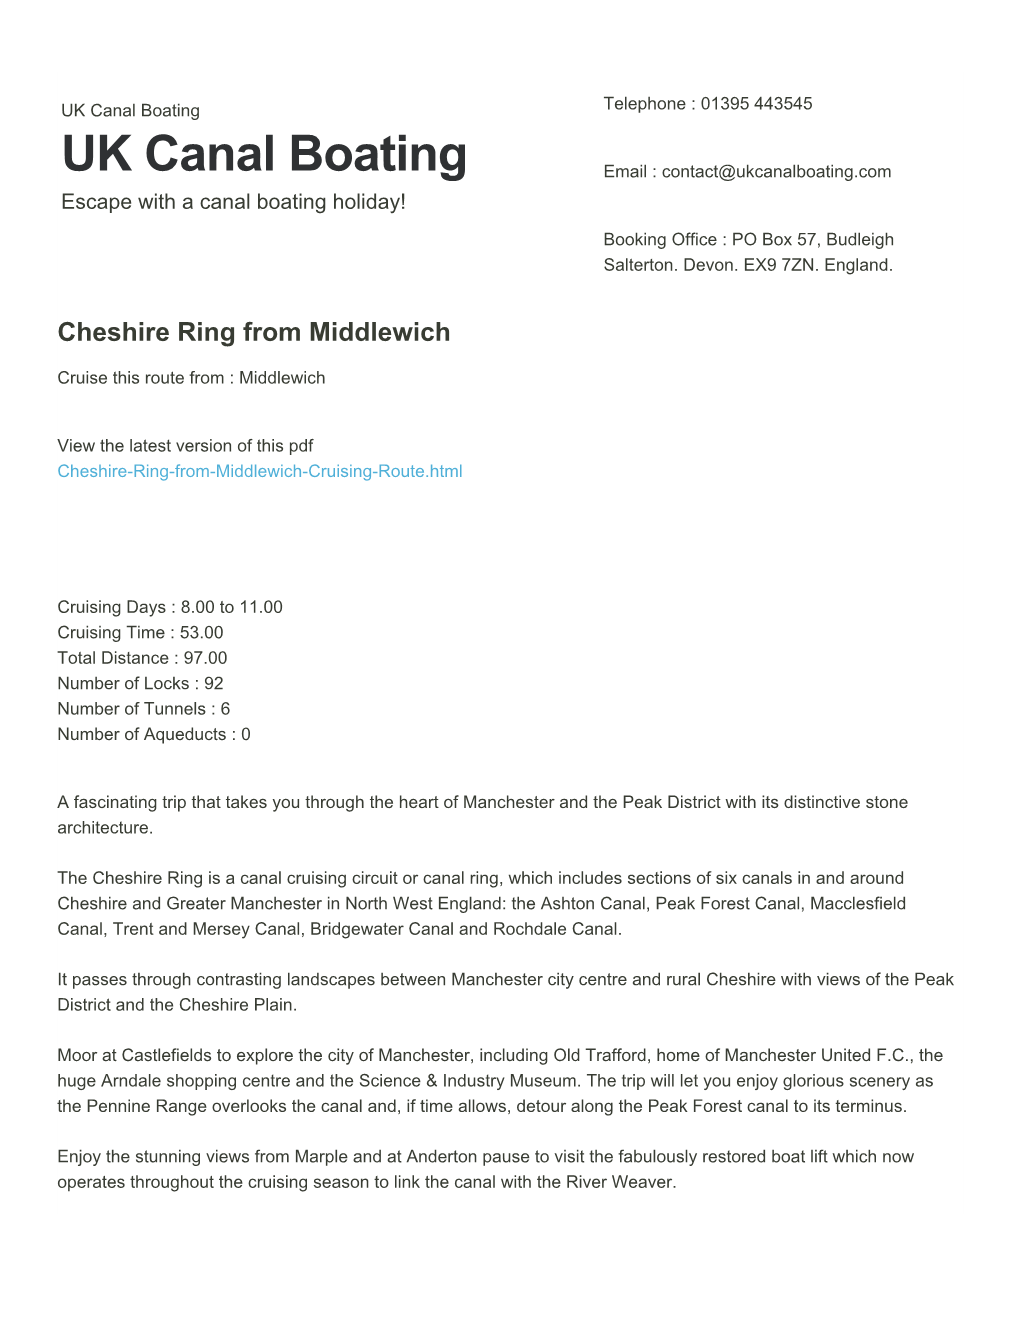 Cheshire Ring from Middlewich | UK Canal Boating